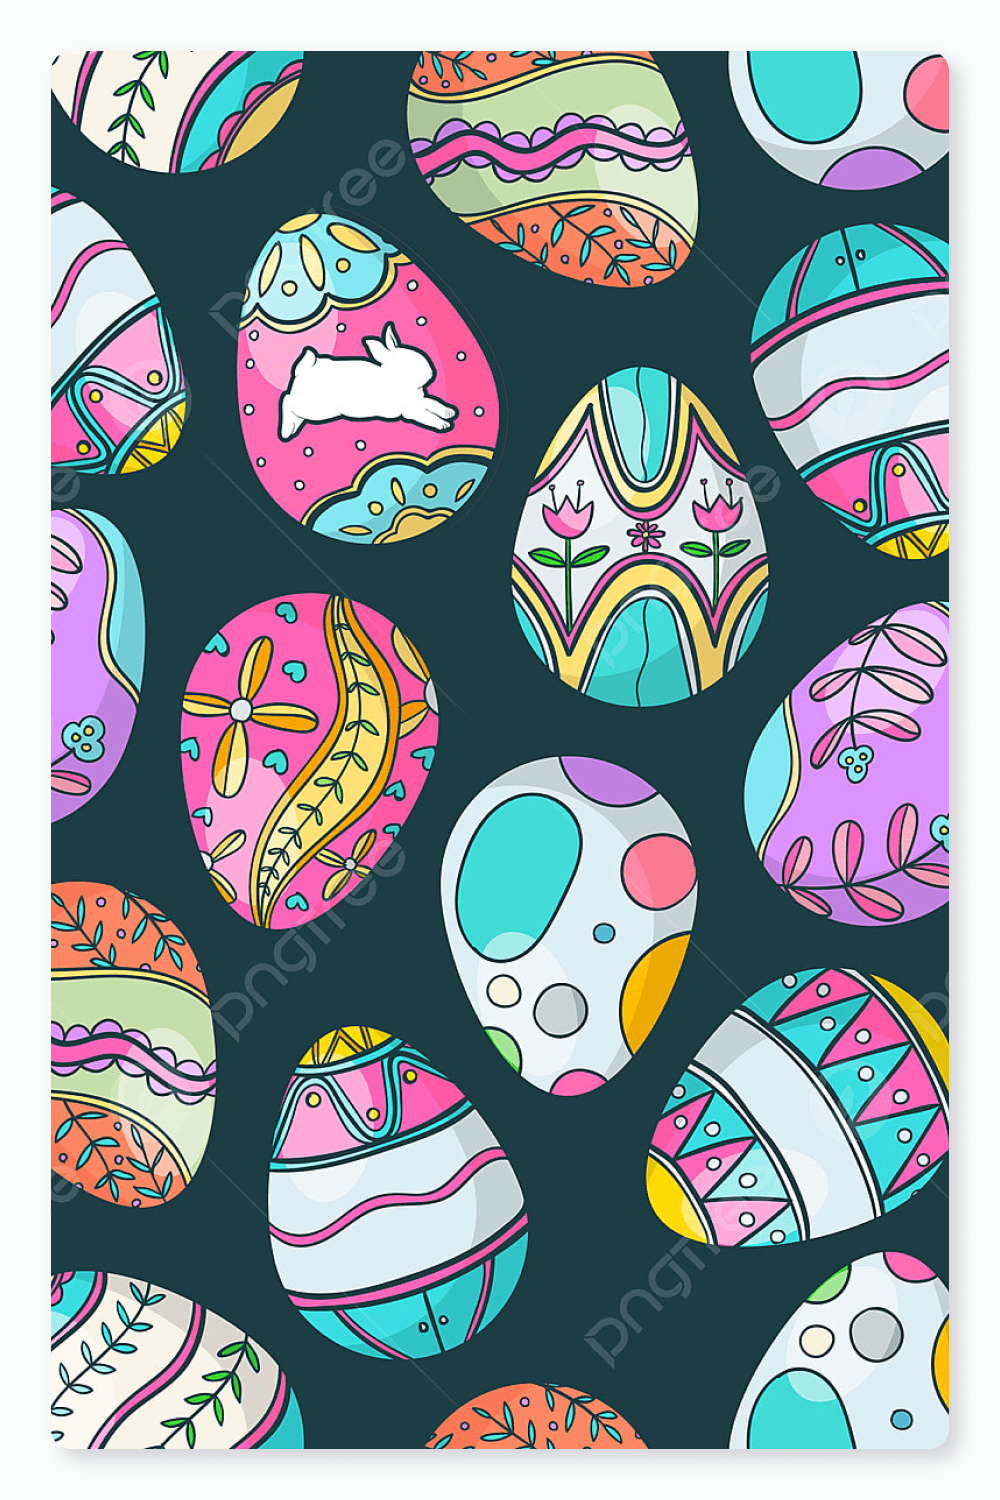 Easter eggs collage in psychedelic coloring.